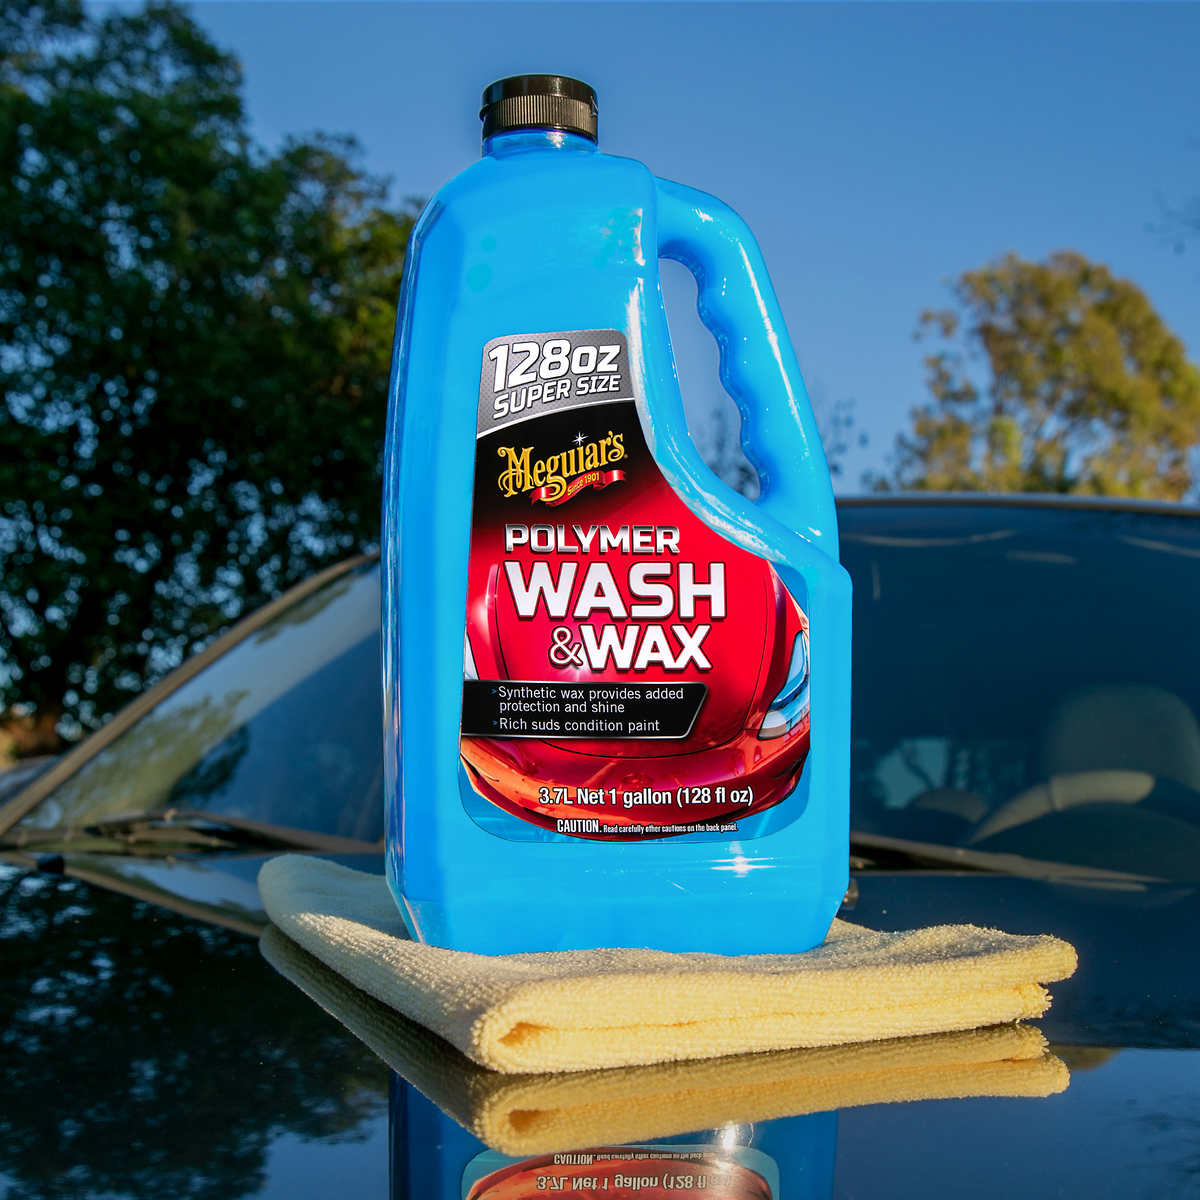 Costco Meguiars Polymer Wash and Wax Review - Toyota GR86, 86, FR